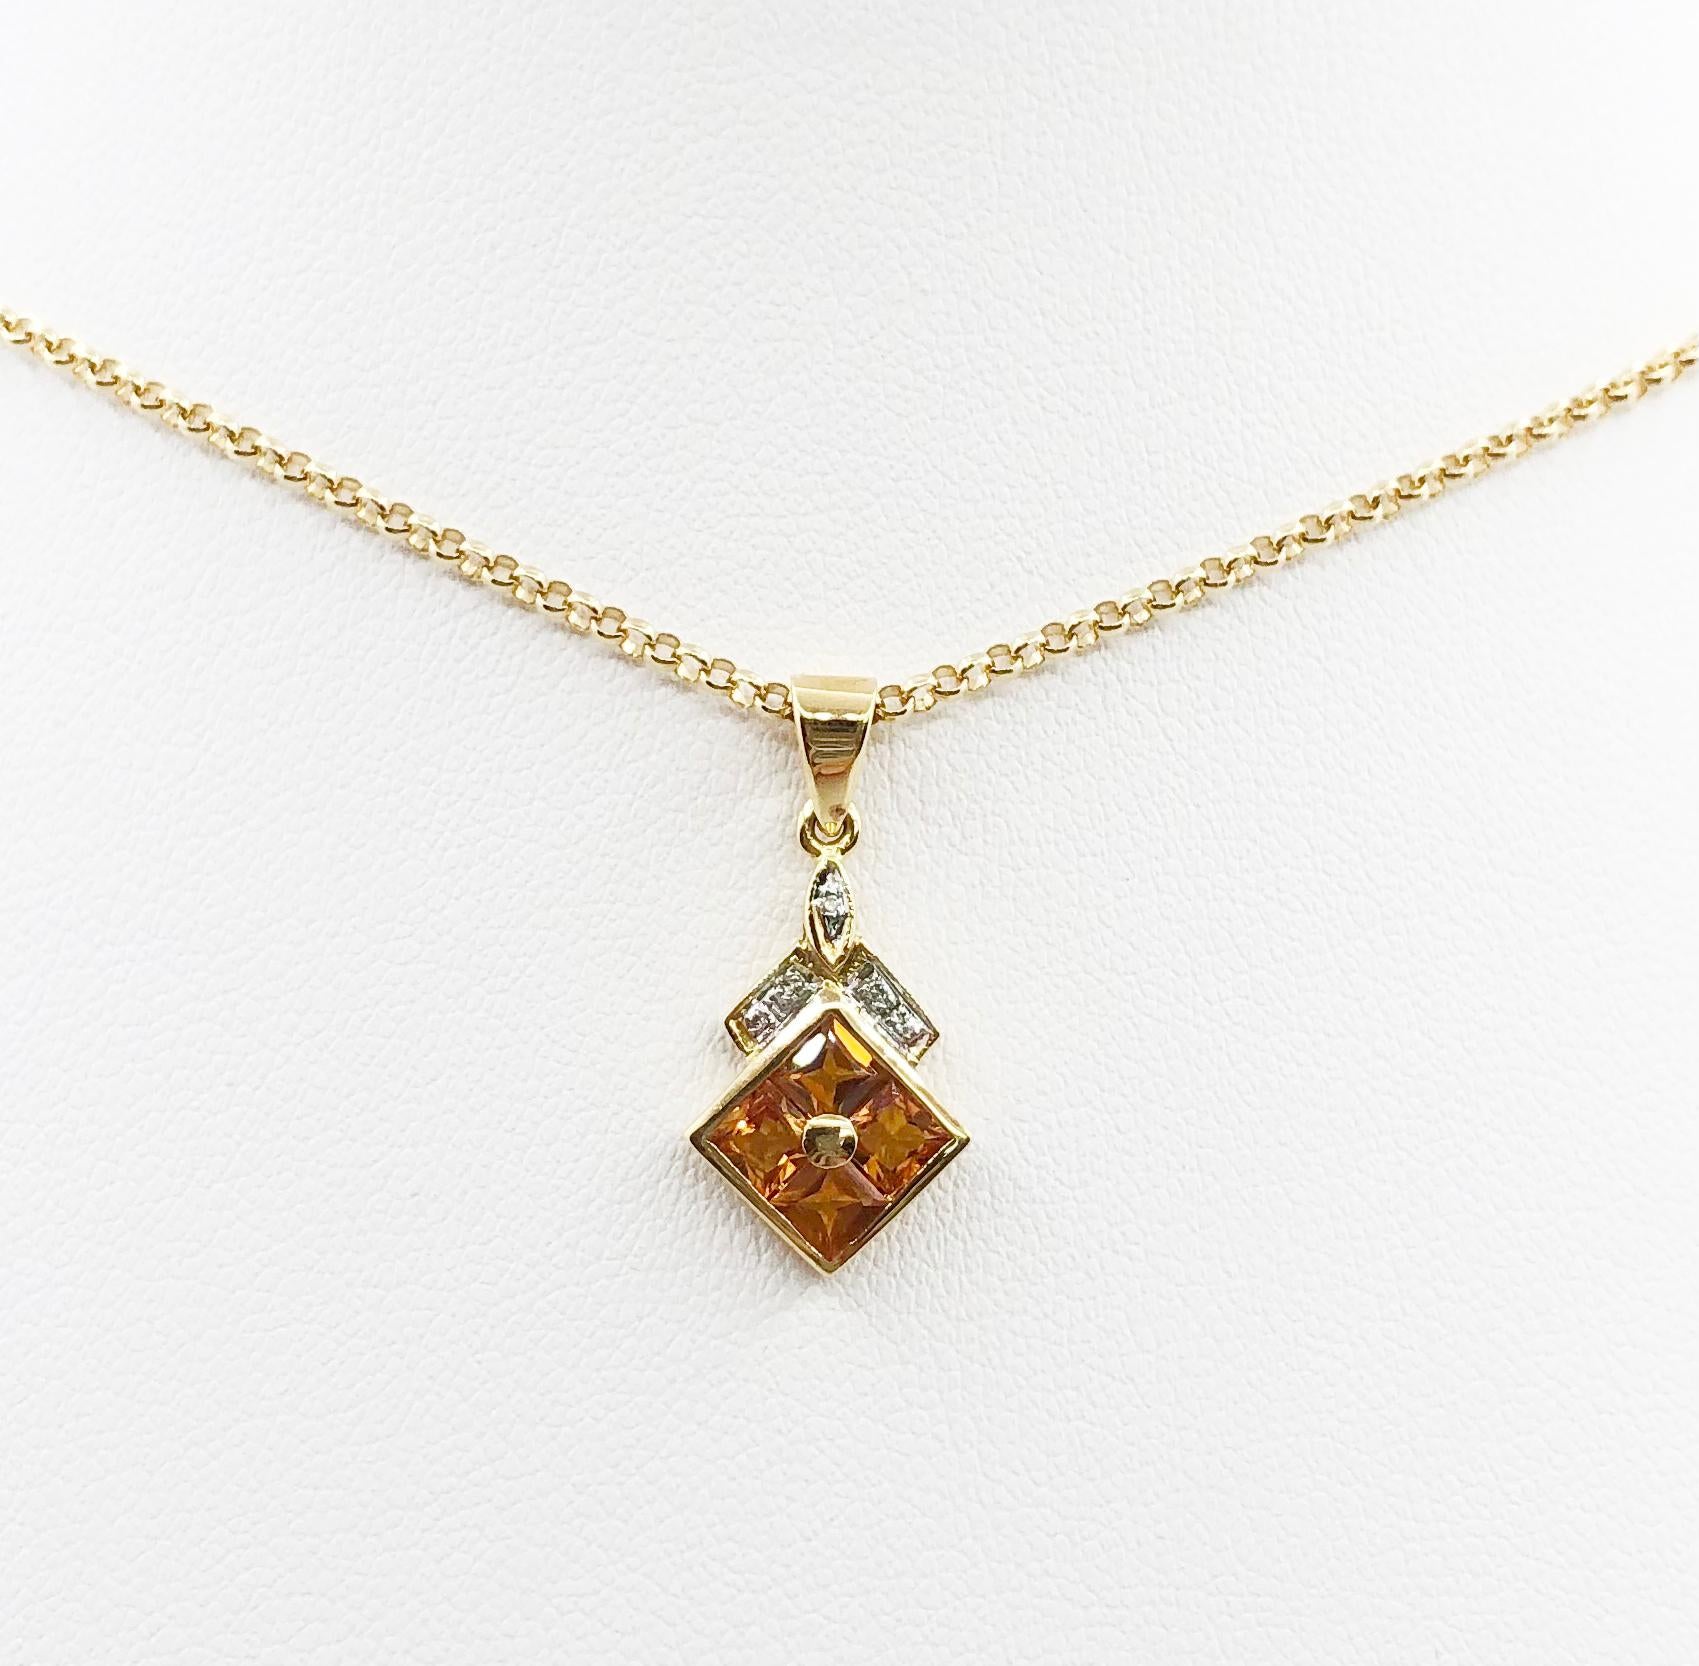 Yellow sapphire 0.84 carat with Diamond 0.02 carat Pendant set in 18 Karat Gold Settings
(chain not included)

Width: 1.1 cm 
Length: 2.3 cm
Total Weight: 2.04 grams

